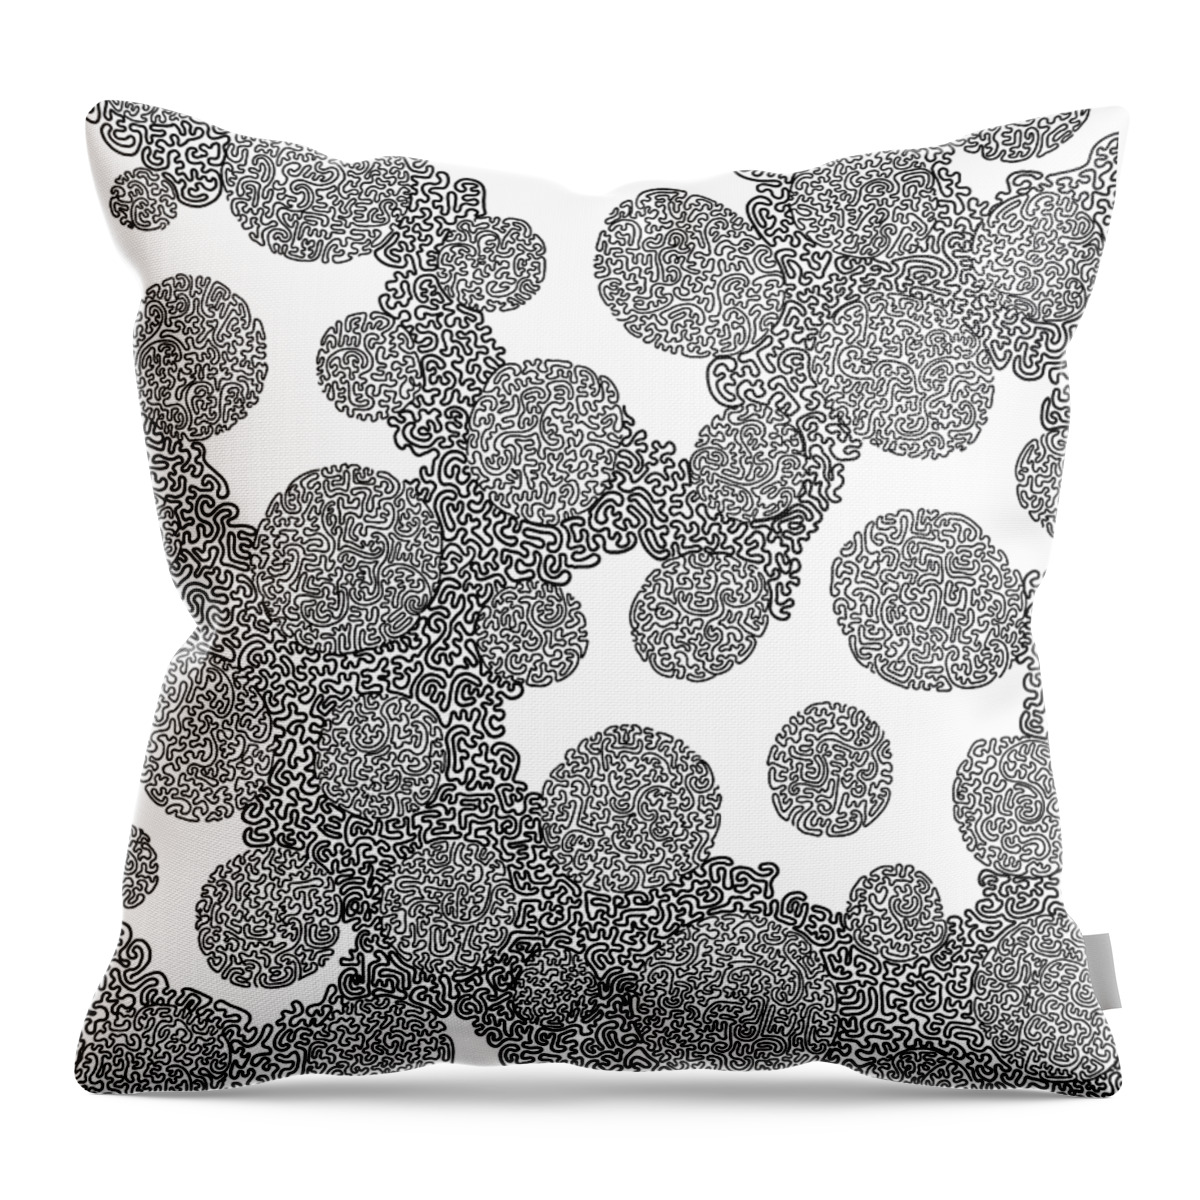  Black And White Throw Pillow featuring the drawing Time For Your Own by A Mad Doodler